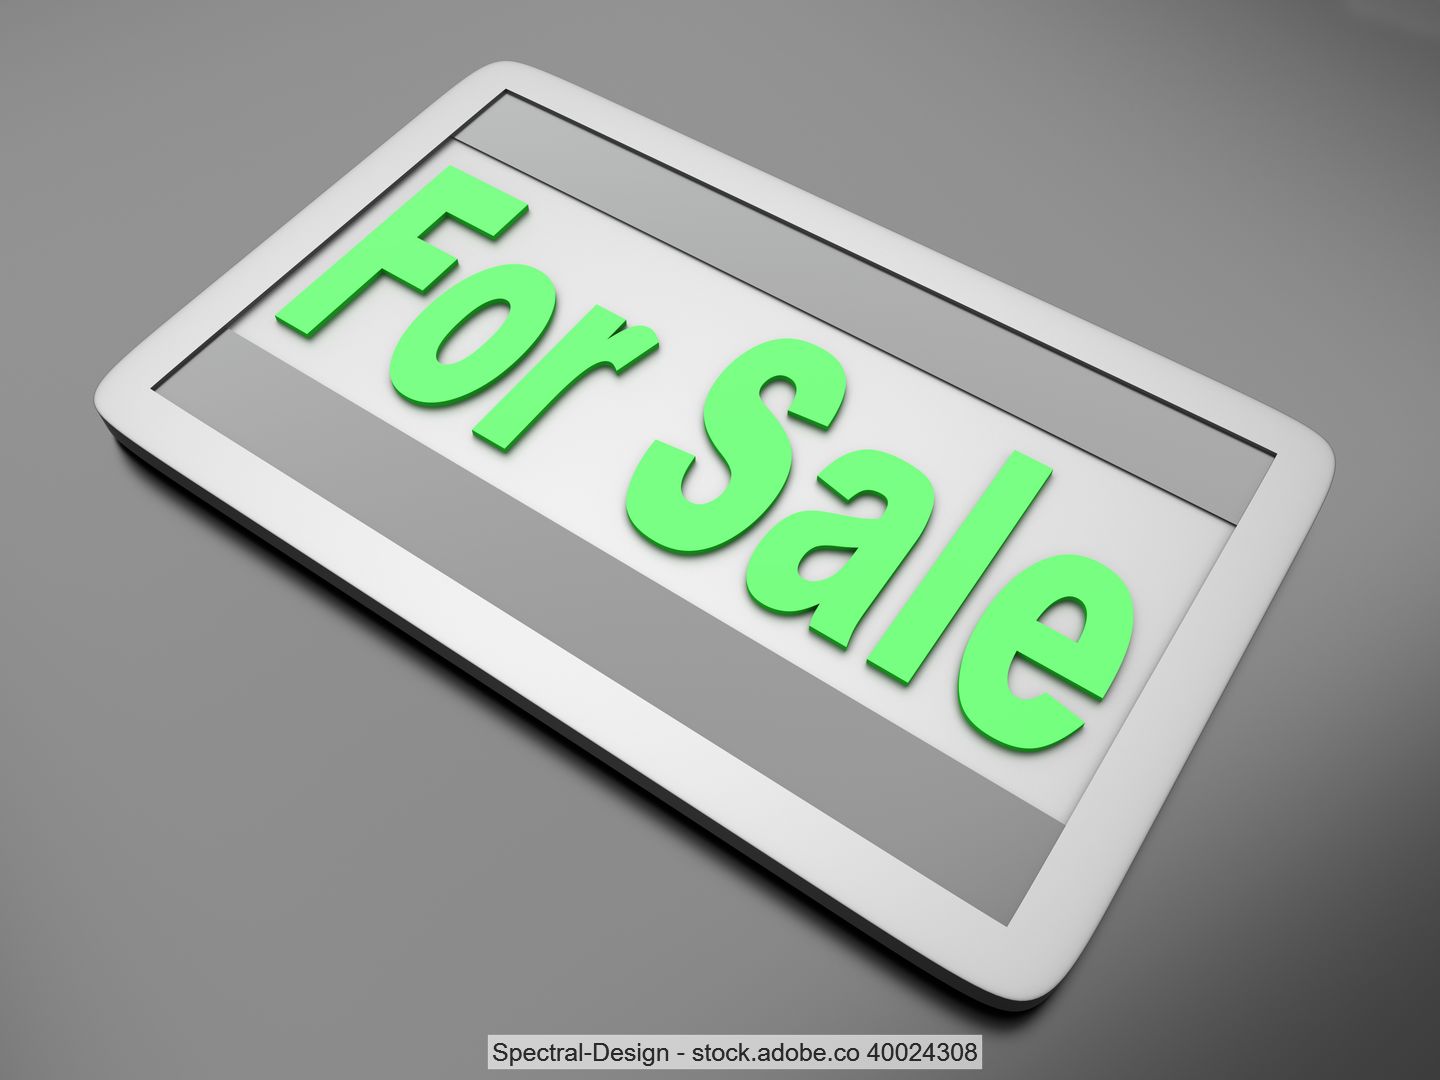 Stock image of a grey and white "For Sale" sign